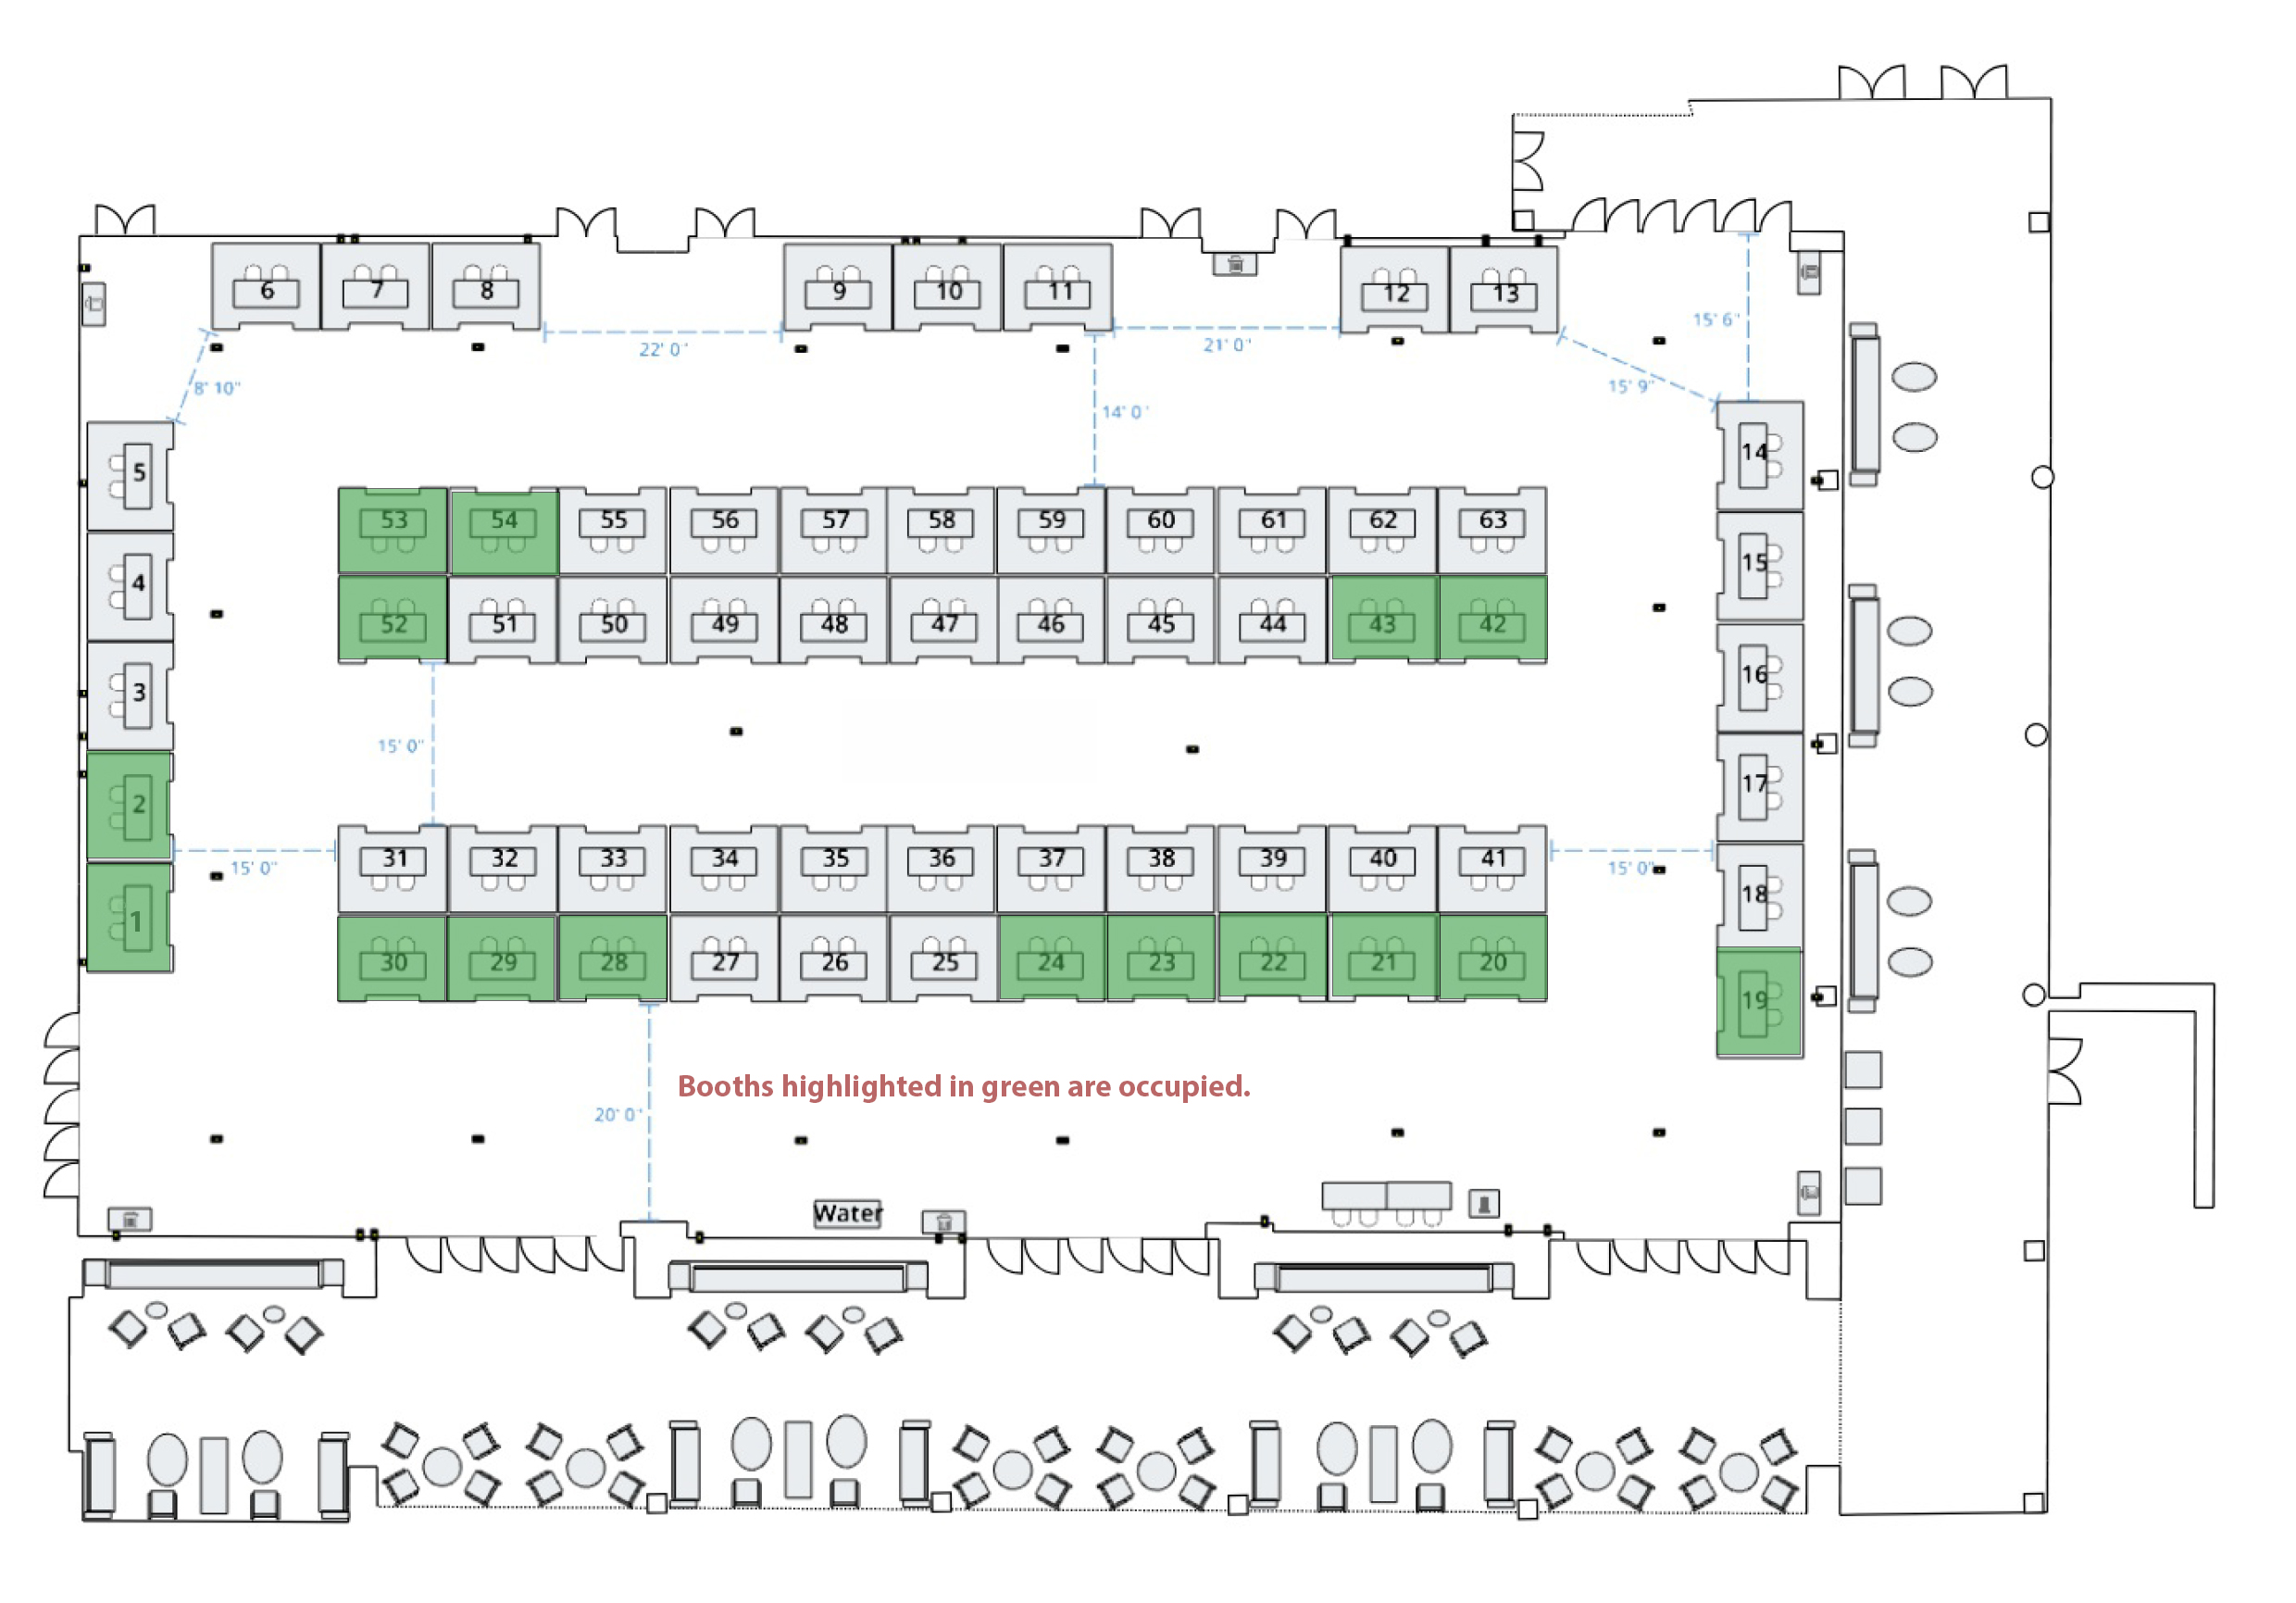 map of booth layouts in exhibit hall